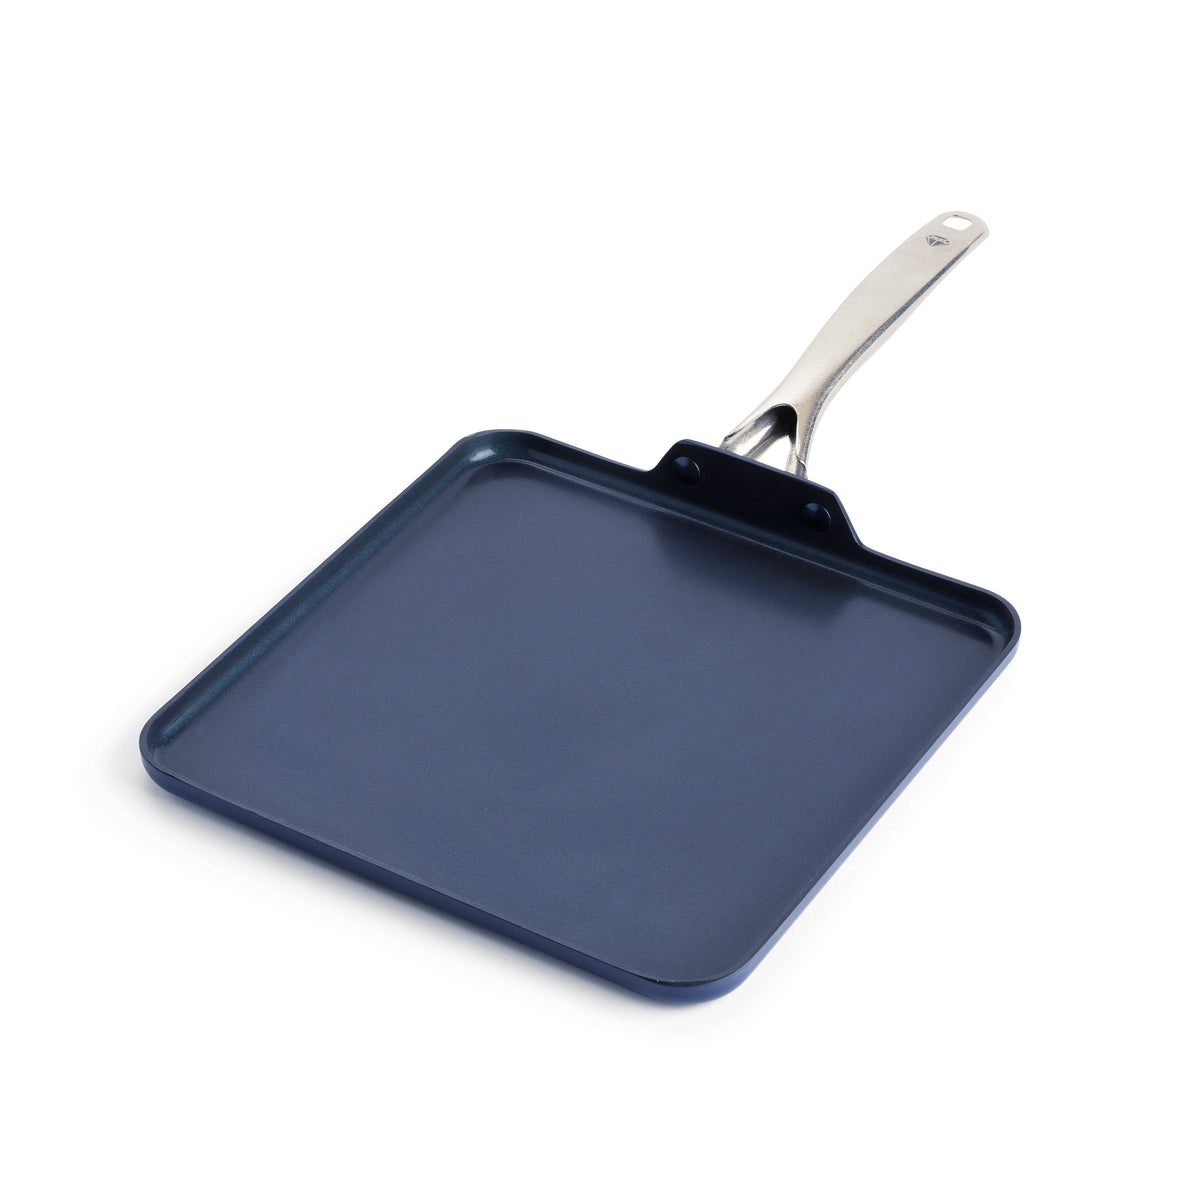 Eazy Mealz Non-Stick Square Grill Pan, Extra Large, 12 inch, Size: Blue